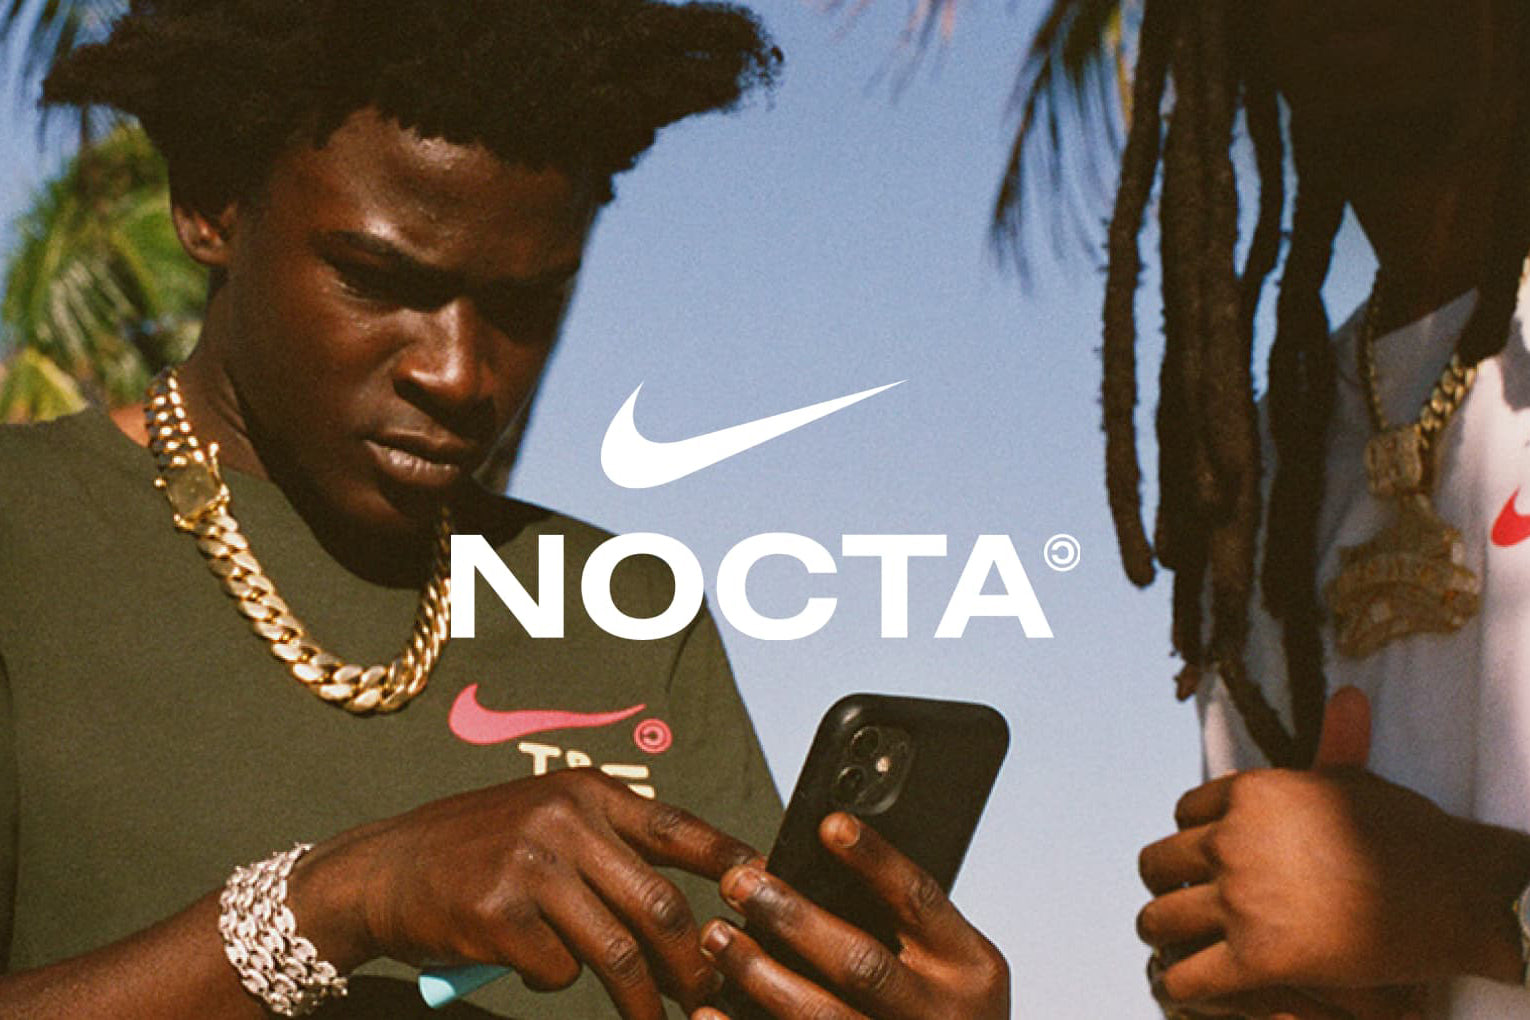 Nike NOCTA 'Turks and Caicos' Collection 22/3/23